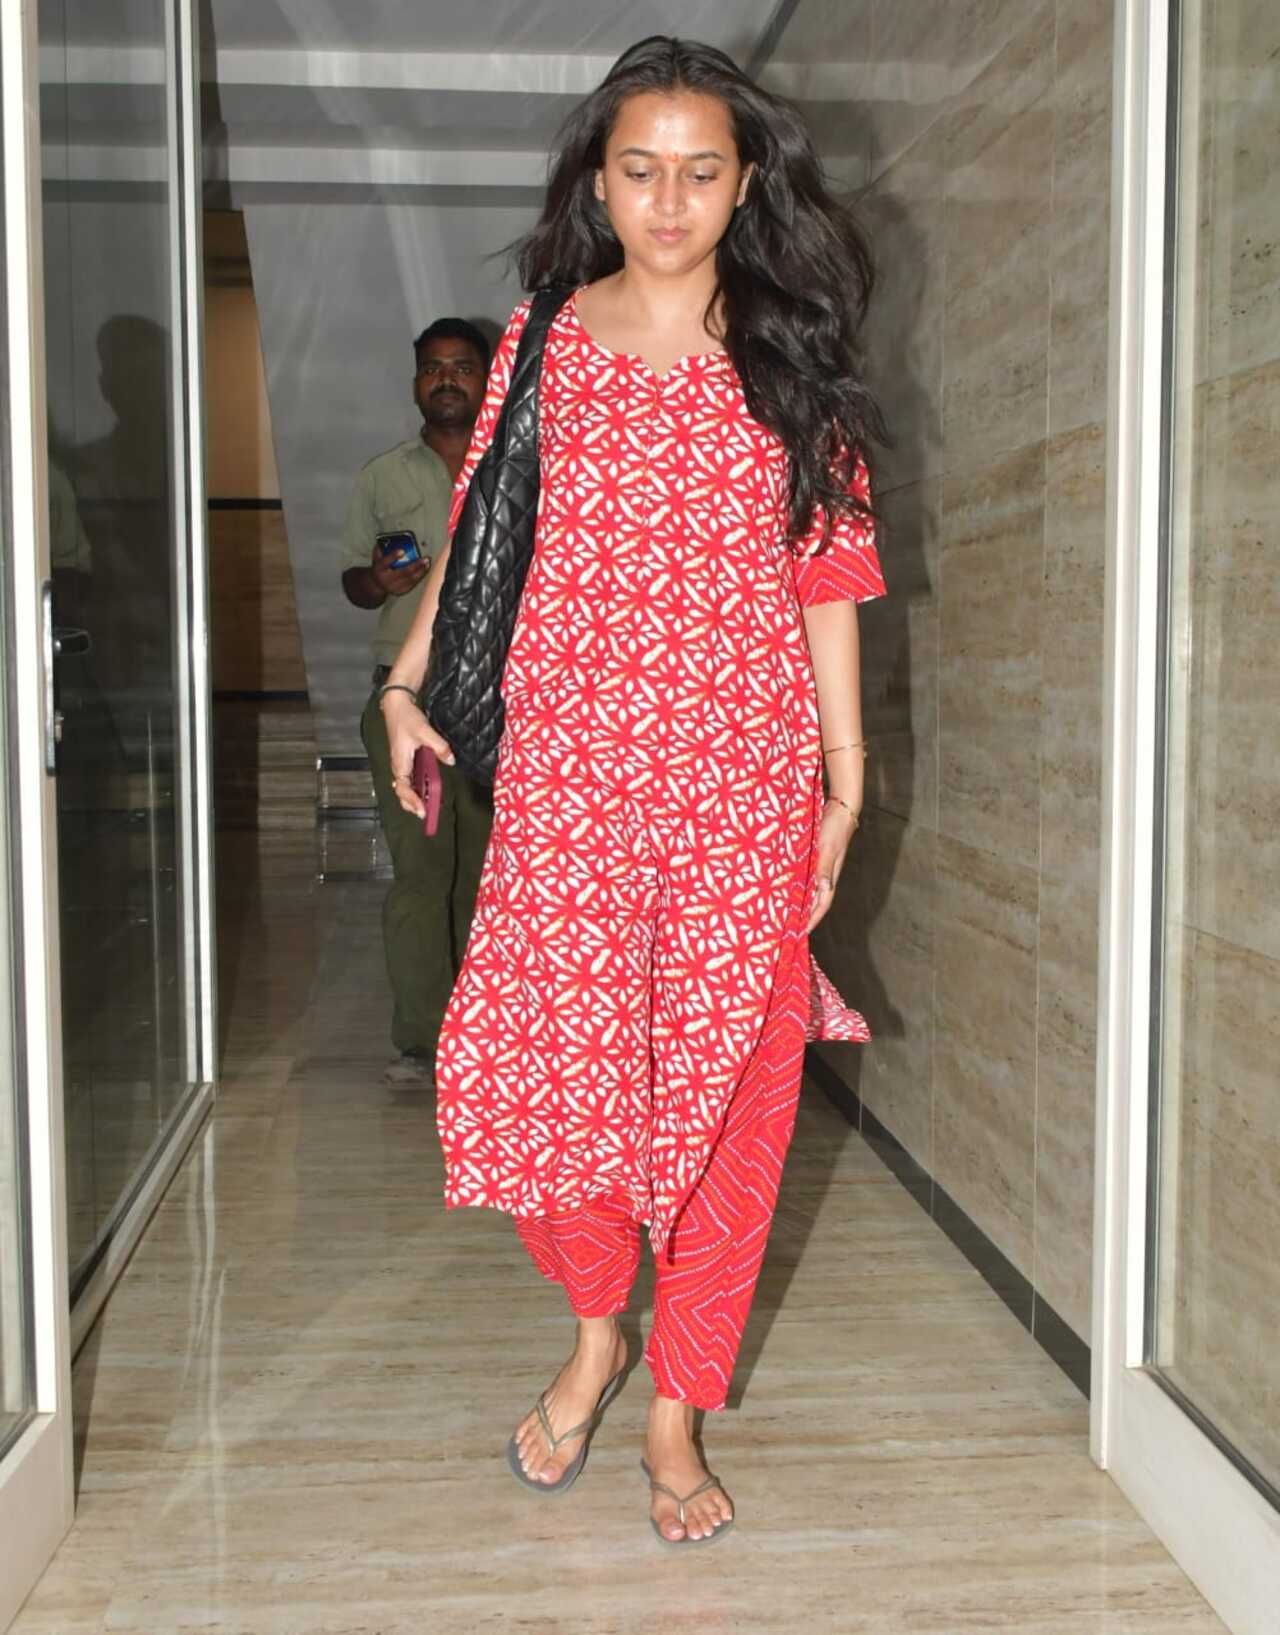 The actress was dressed in a printed red kurta and palazzo